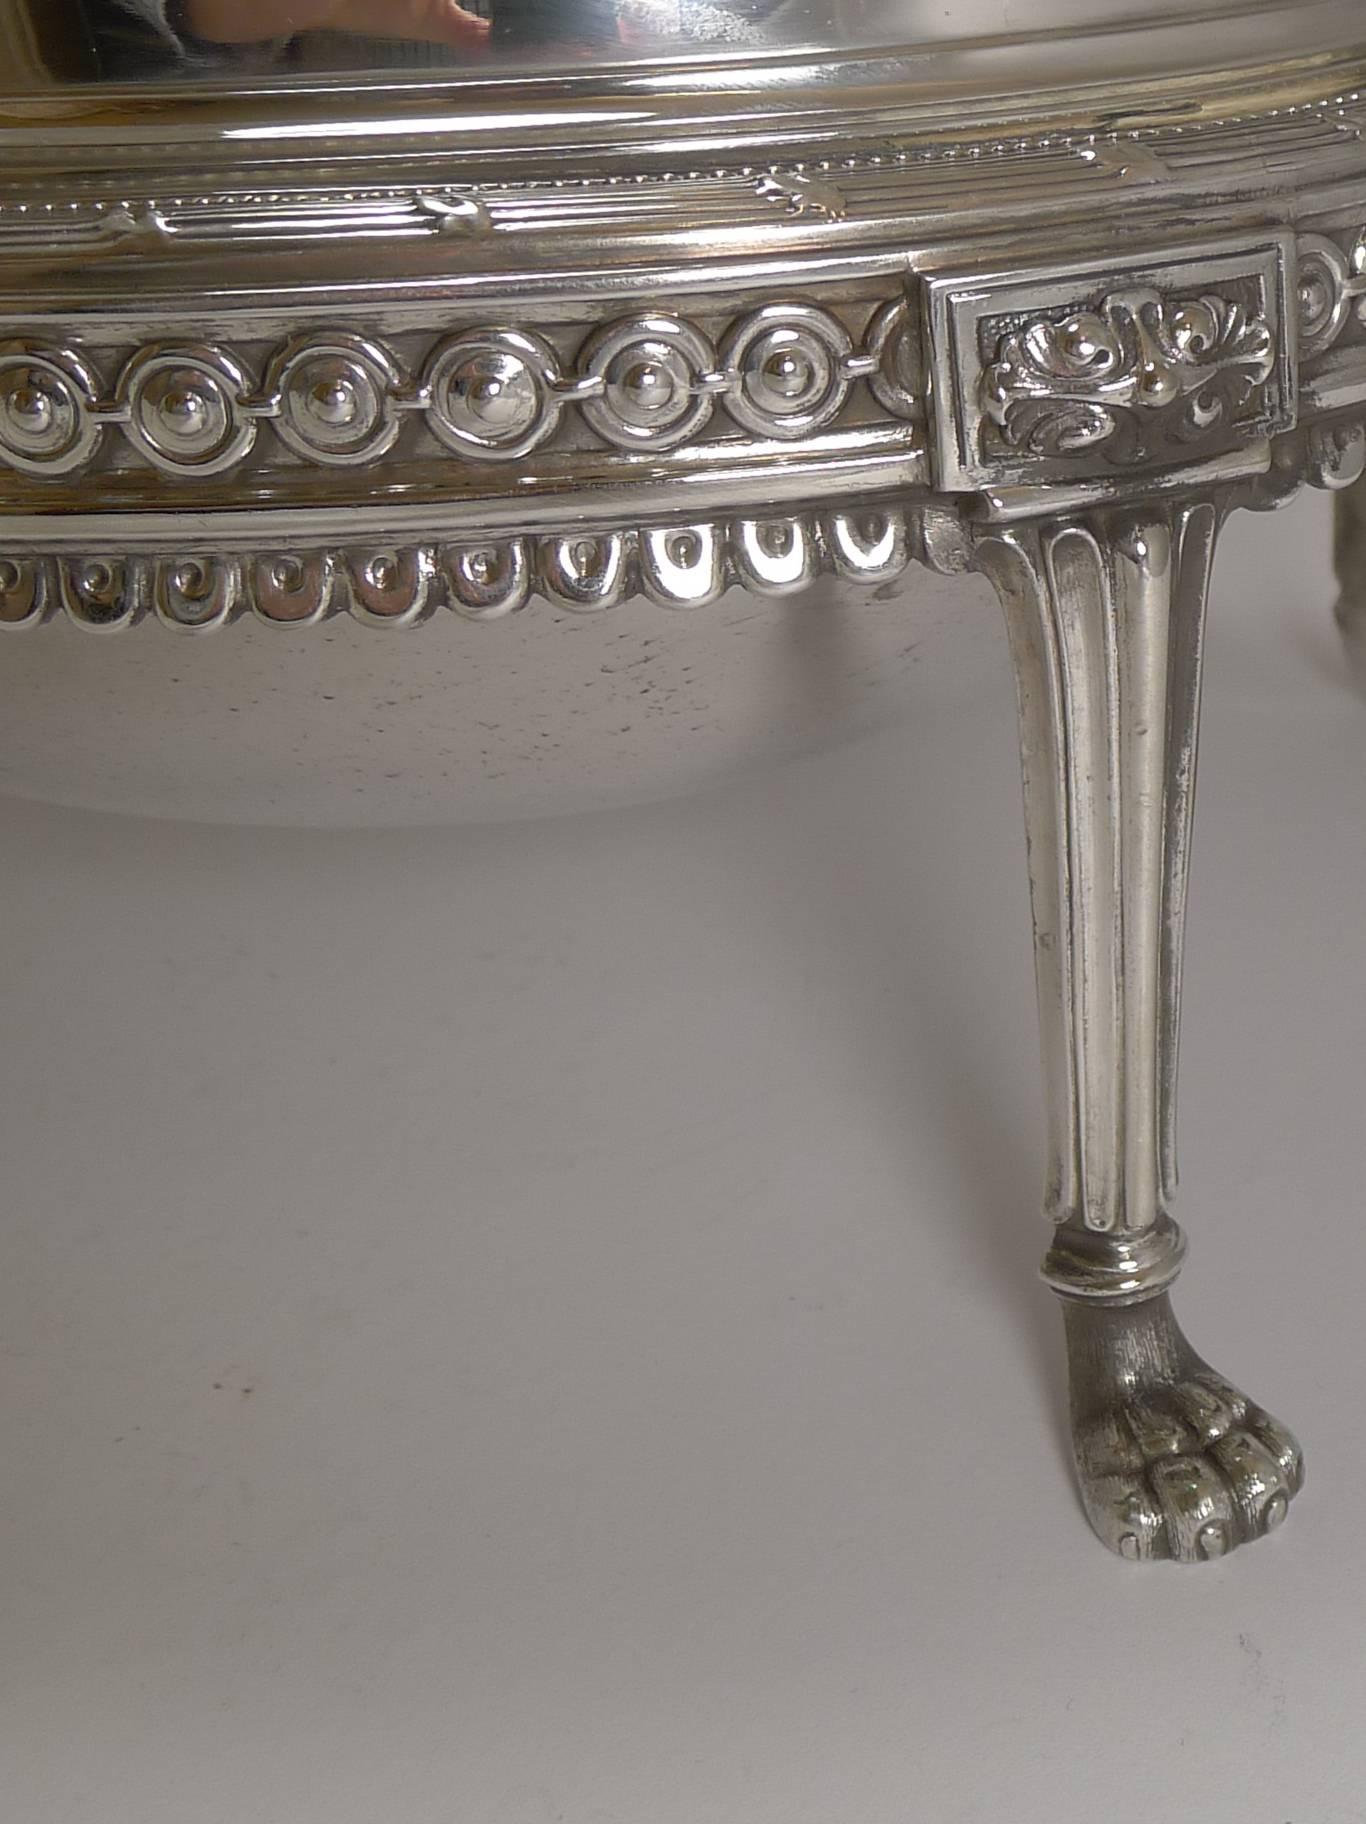 An absolutely fabulous and grand revolving silver plated breakfast dish standing on four Lion's paw feet, very English and very Victorian. There is a beautiful cast border running around the dish and the domed top is beautifully engraved with a